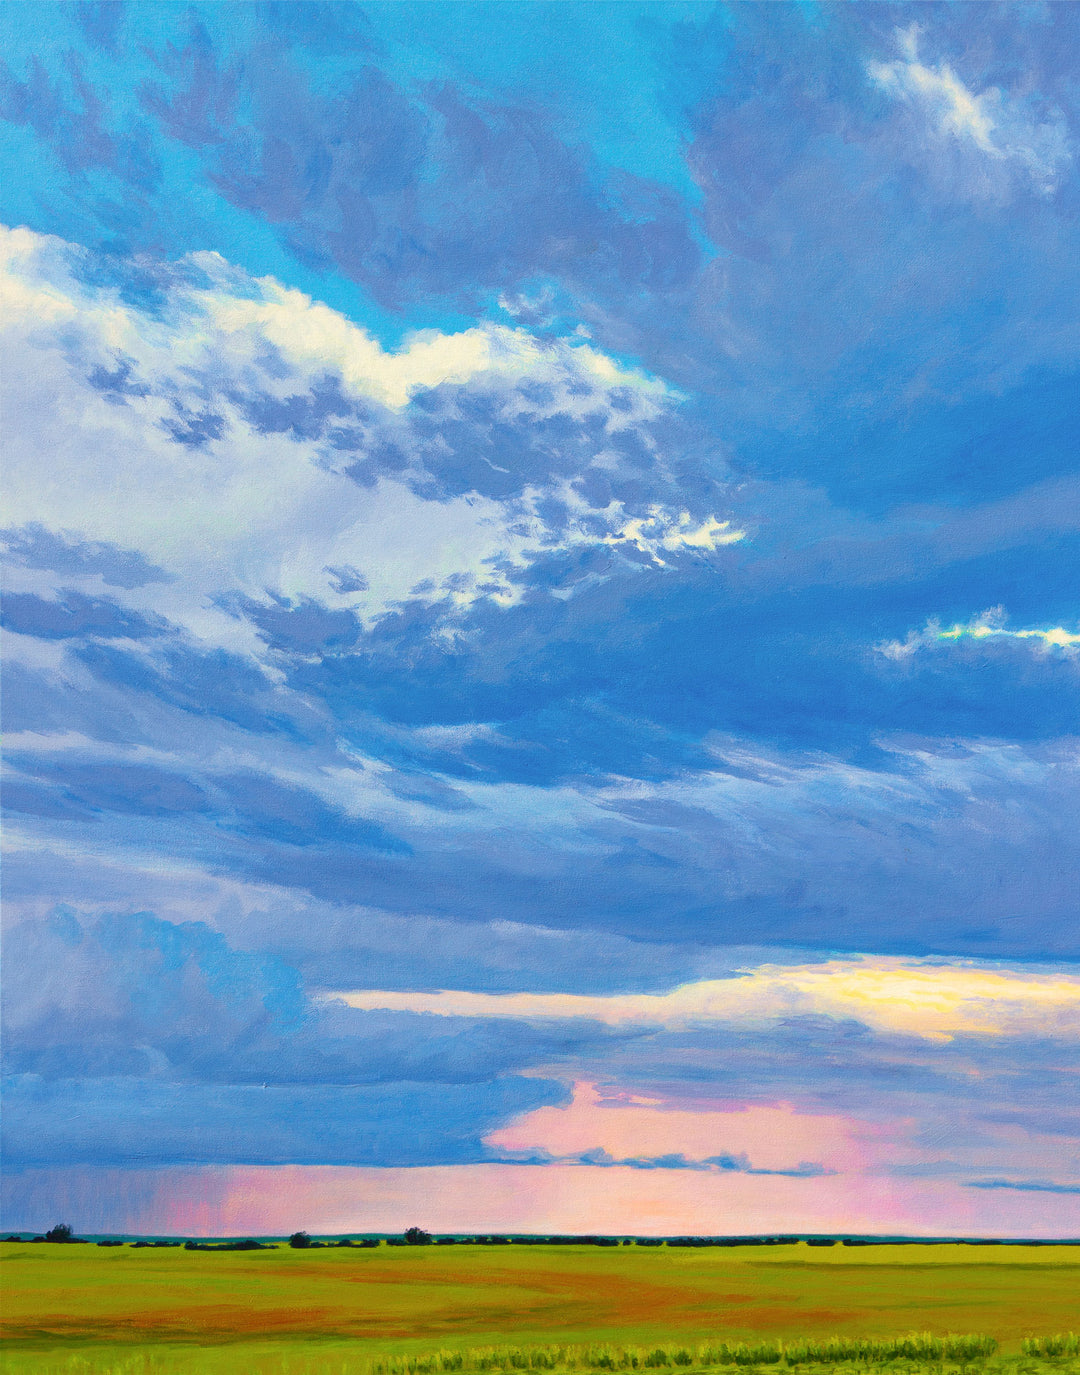  A vertical painting of a summer storm in the distance. Green fields, colorful sky.